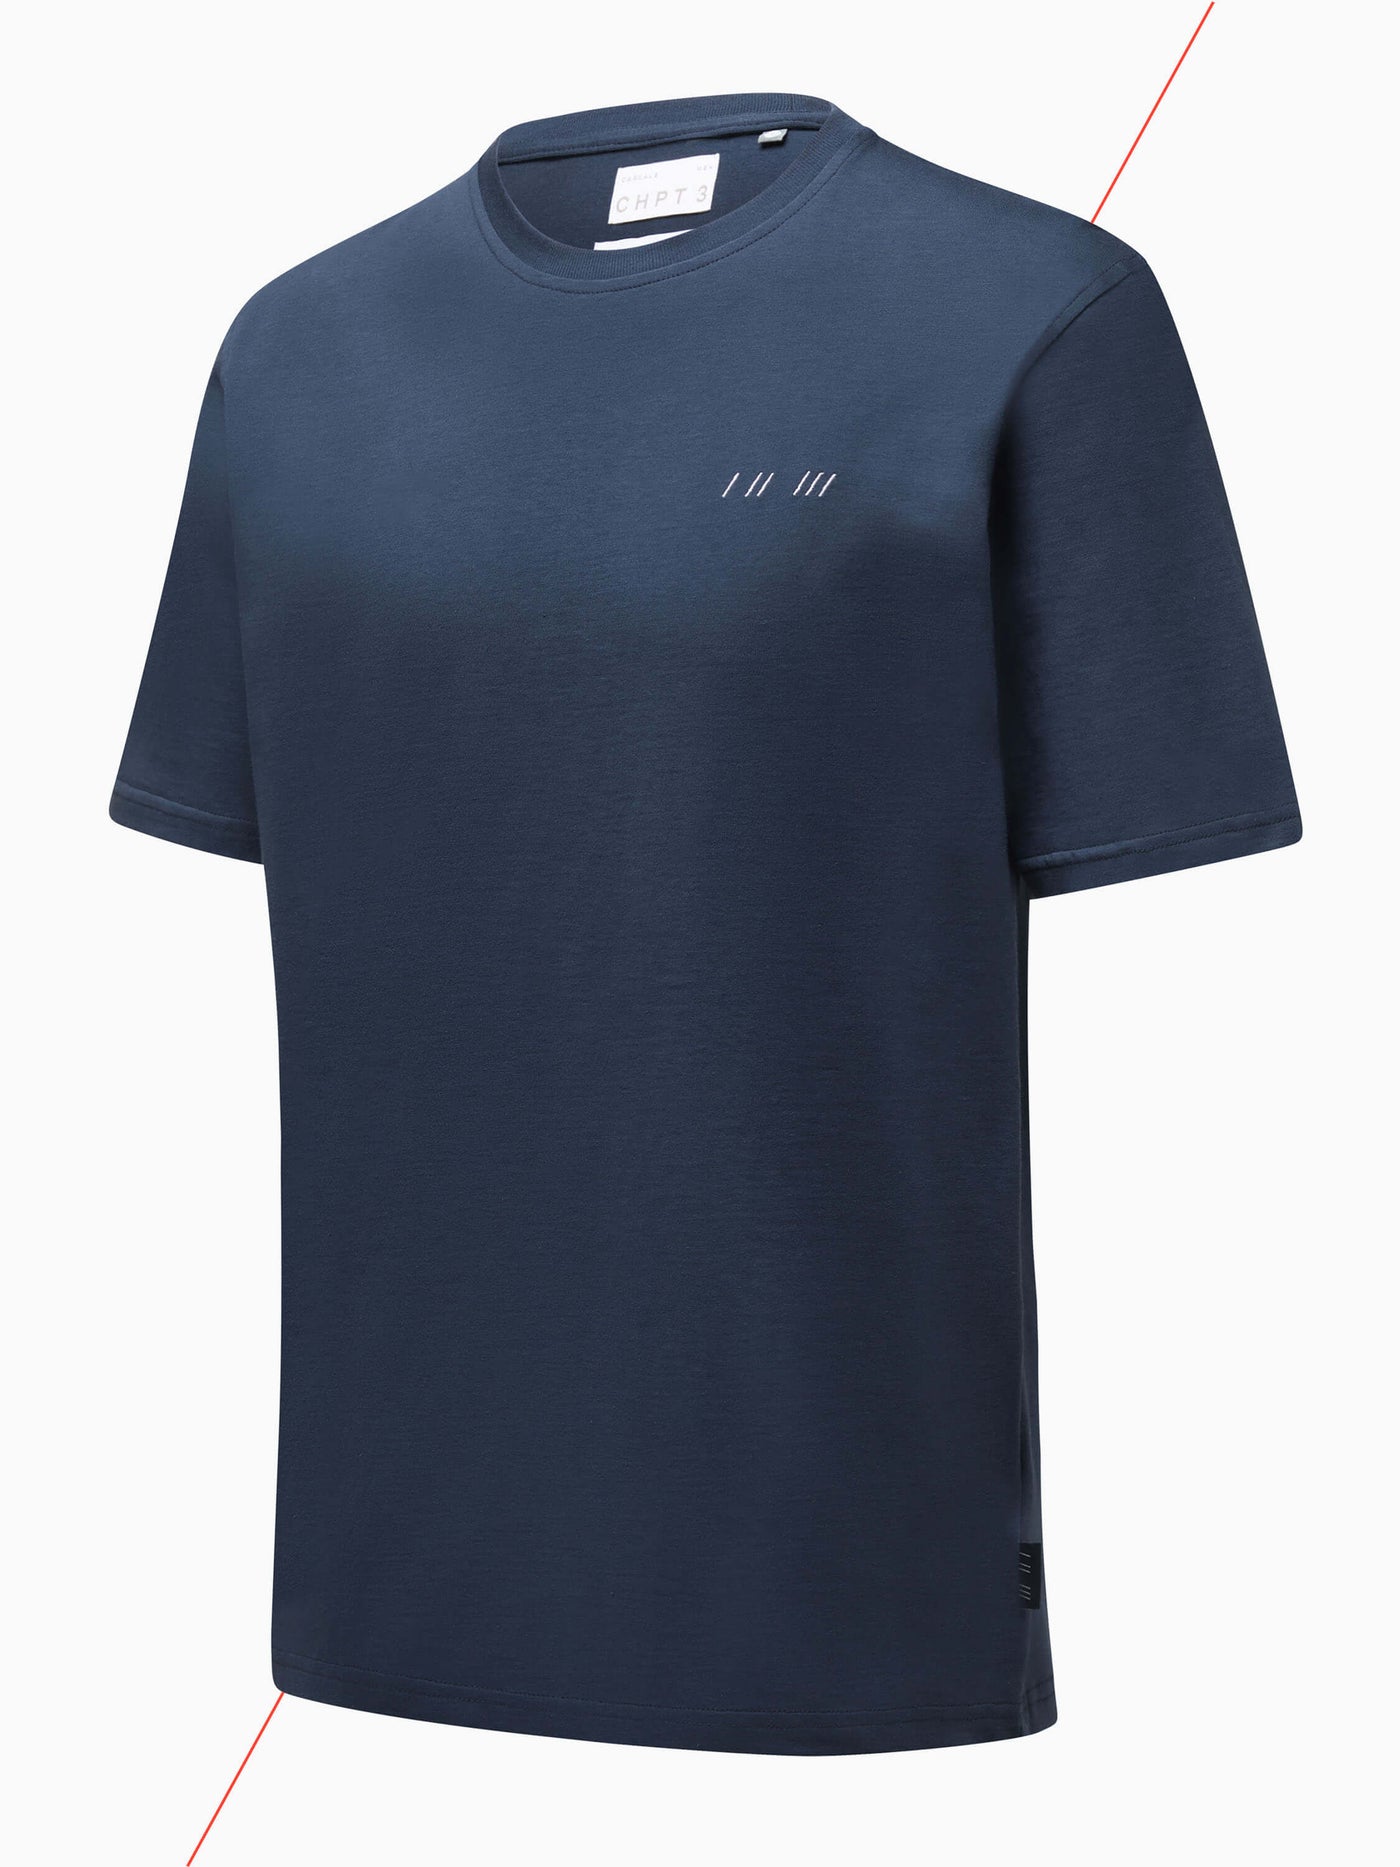 CHPT3 Elysée men's organic cotton t-shirt in colour Outer Space blue, pictured side on #color_outer-space-blue